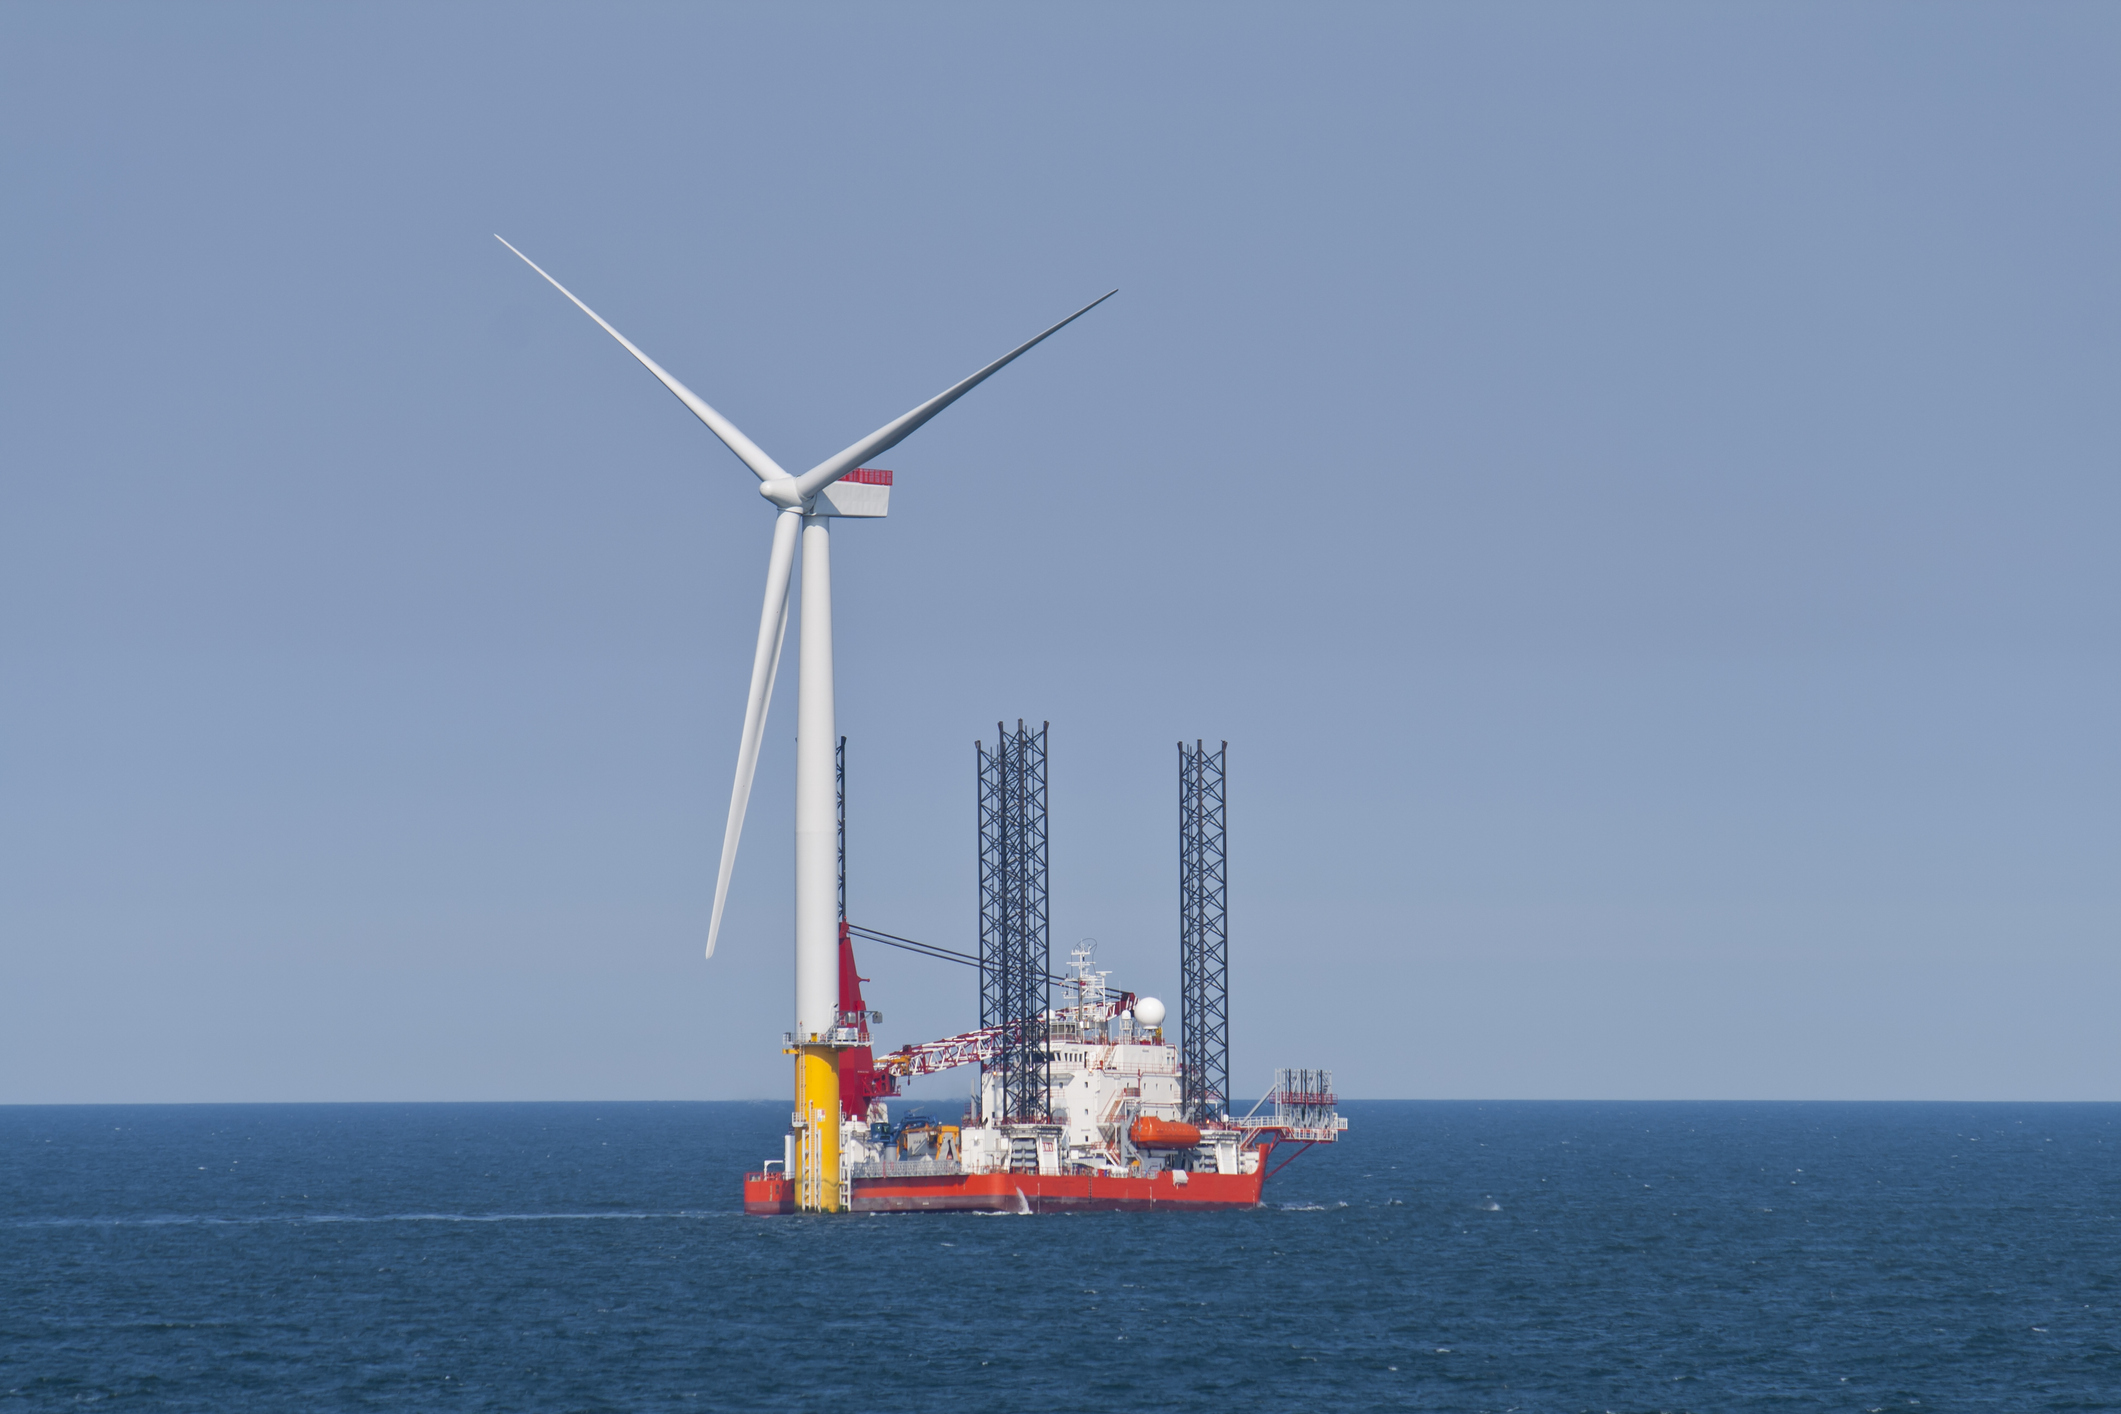 GDG Publishes Review of Irish Offshore Renewable Energy Sector’s Data & Information Requirements